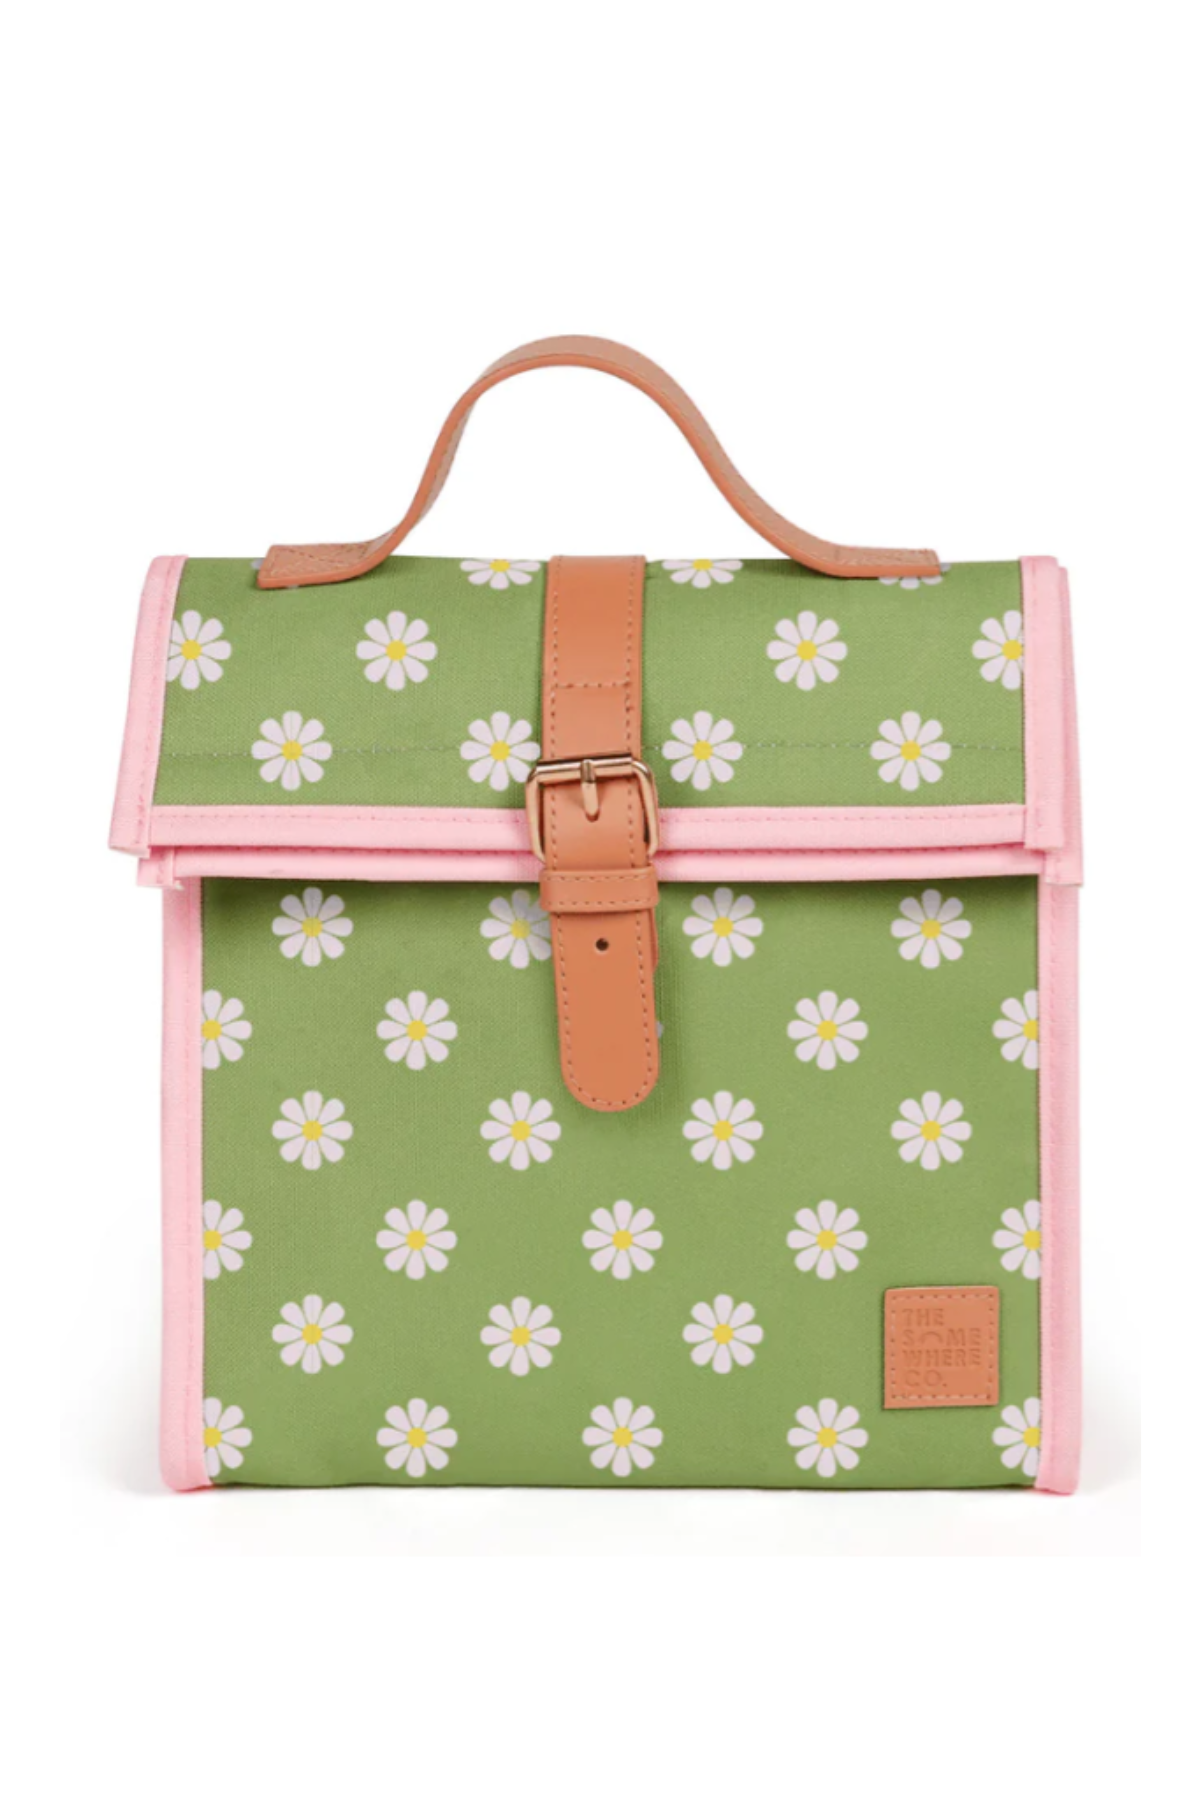 Versailles Garden Lunch Satchel by The Somewhere Co